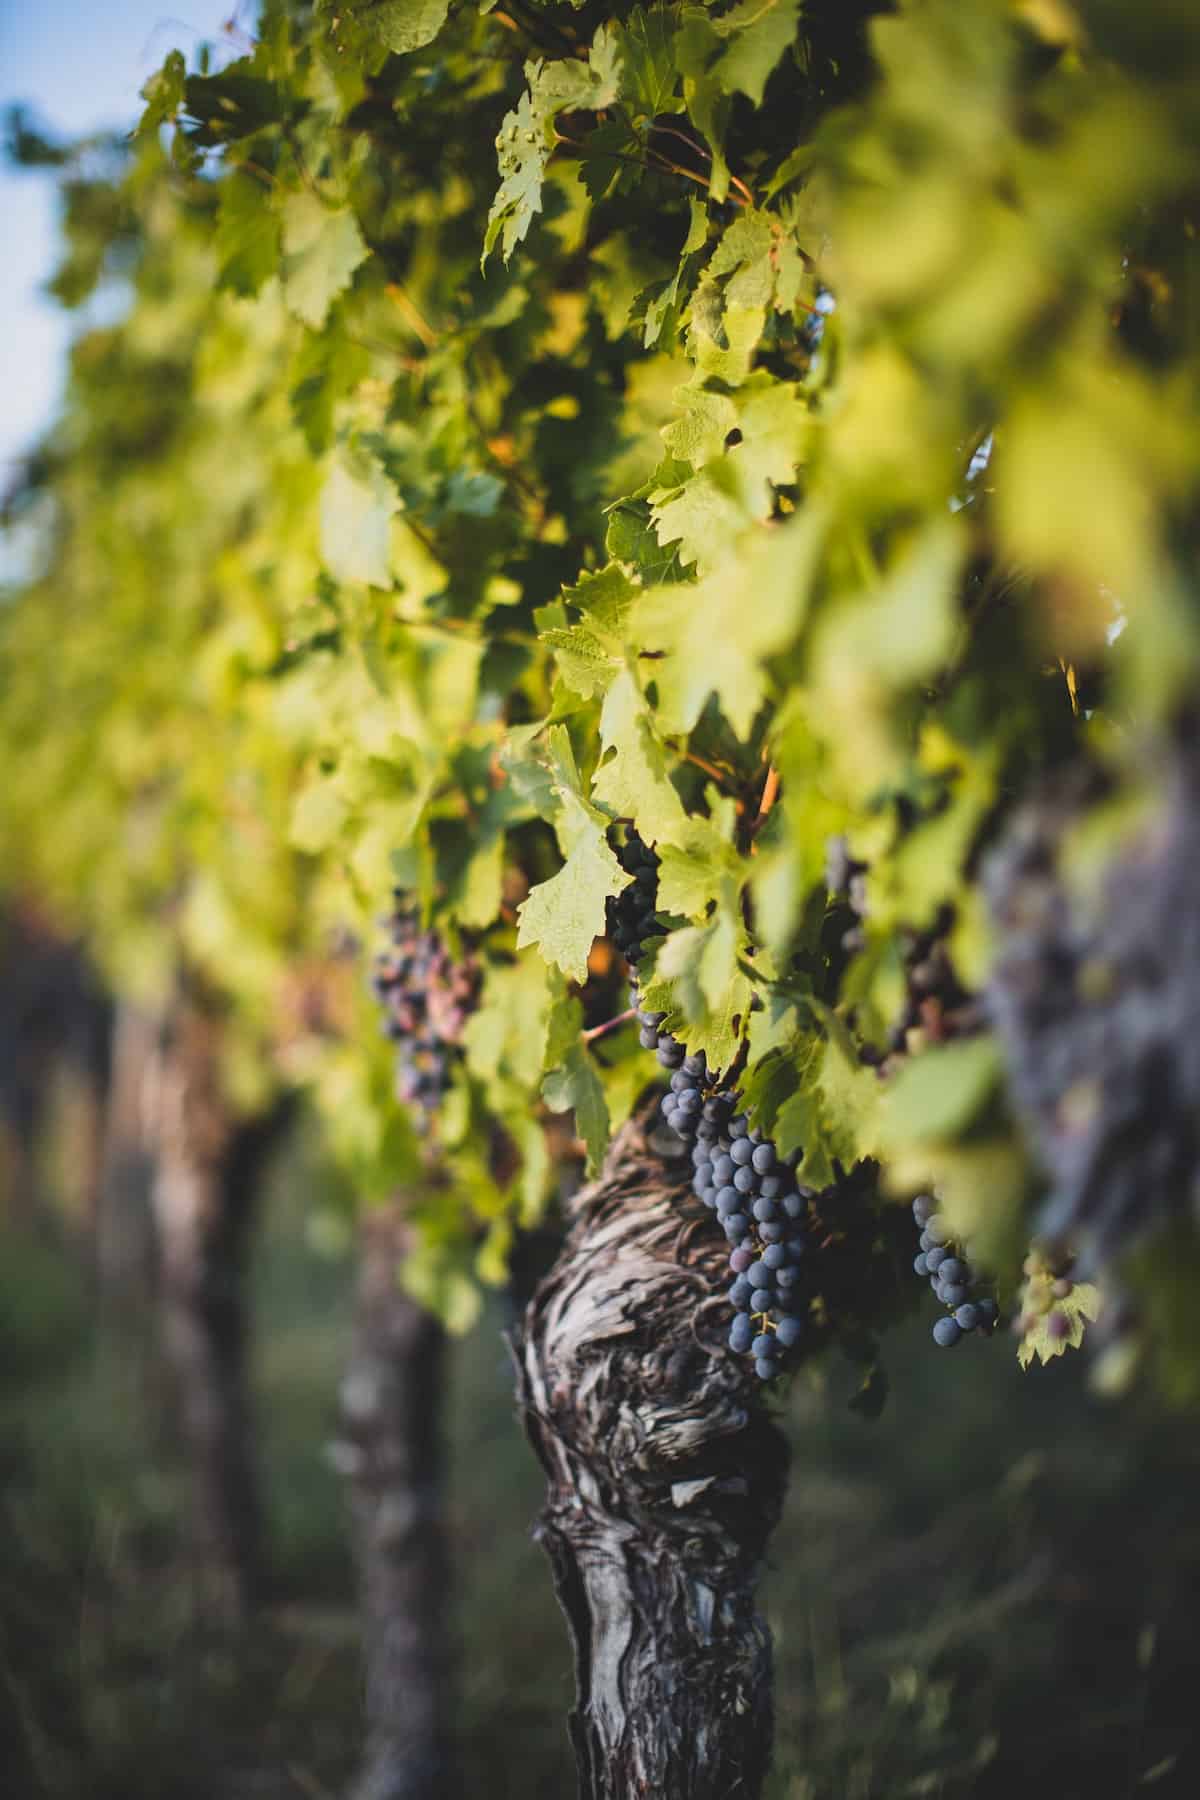 Red wine grapes growing on a vine in a vineyard